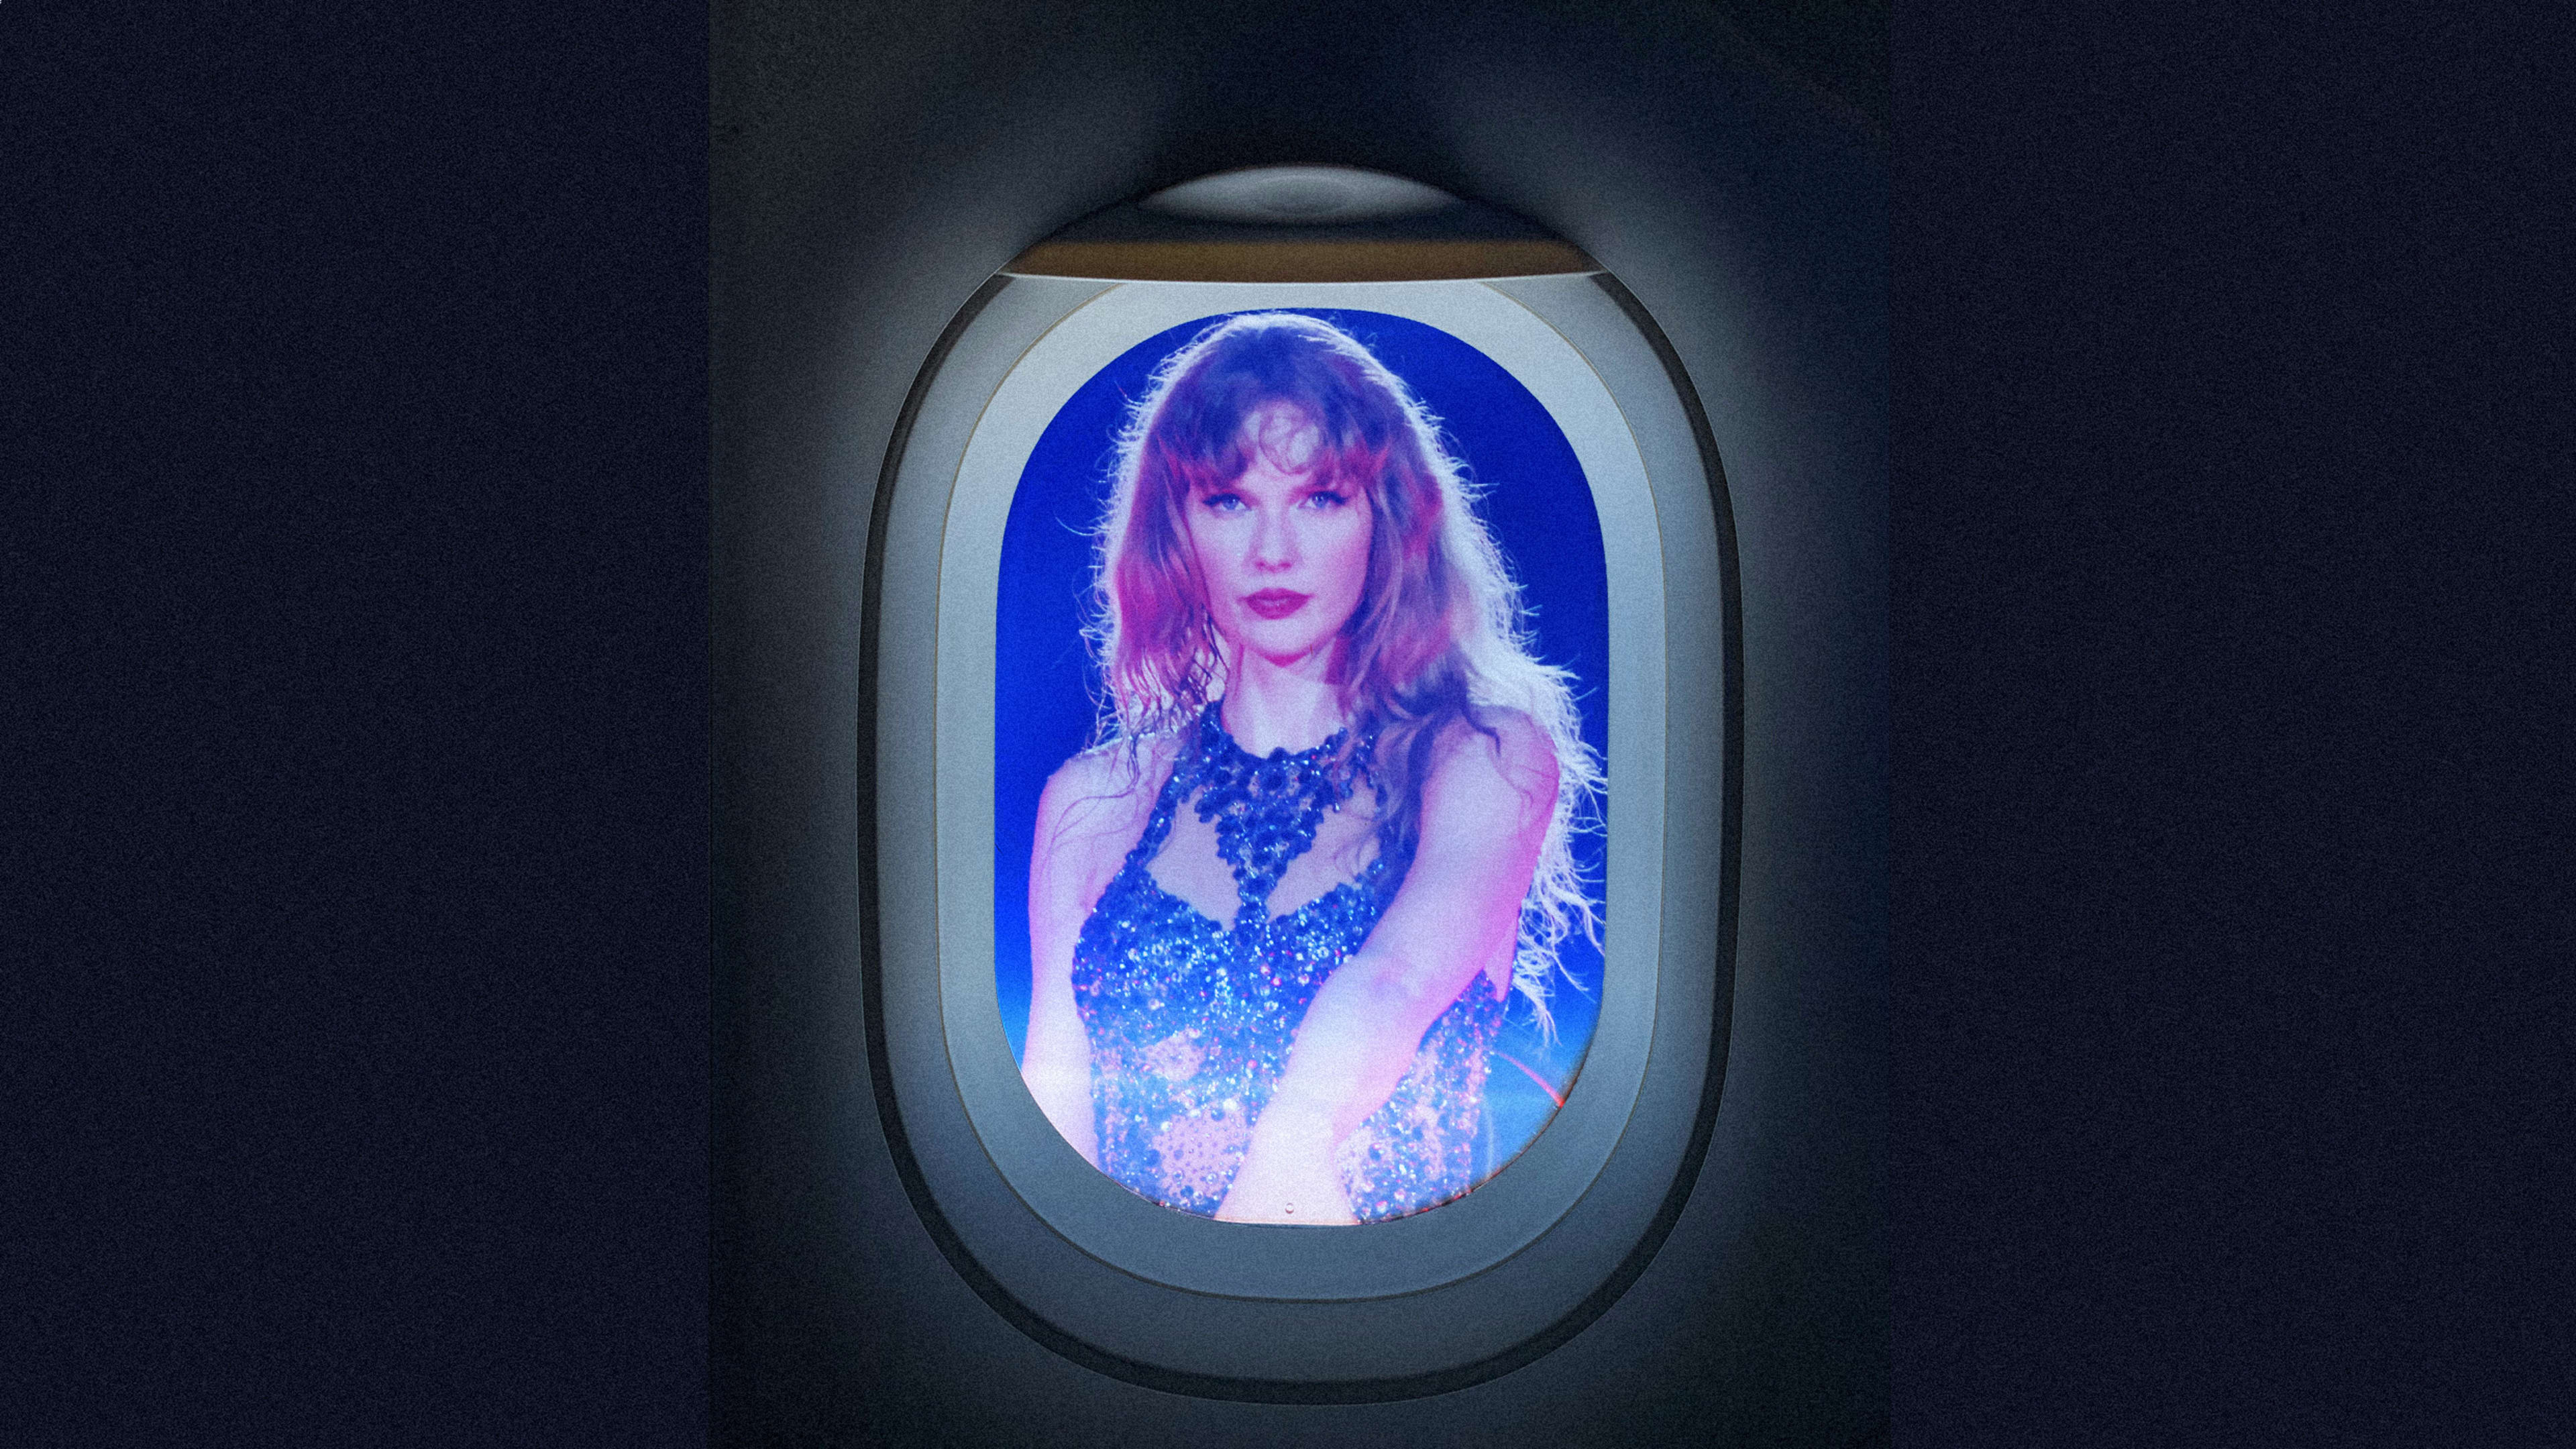 Taylor Swift says sharing her flight information is stalking. Here’s what an attorney thinks